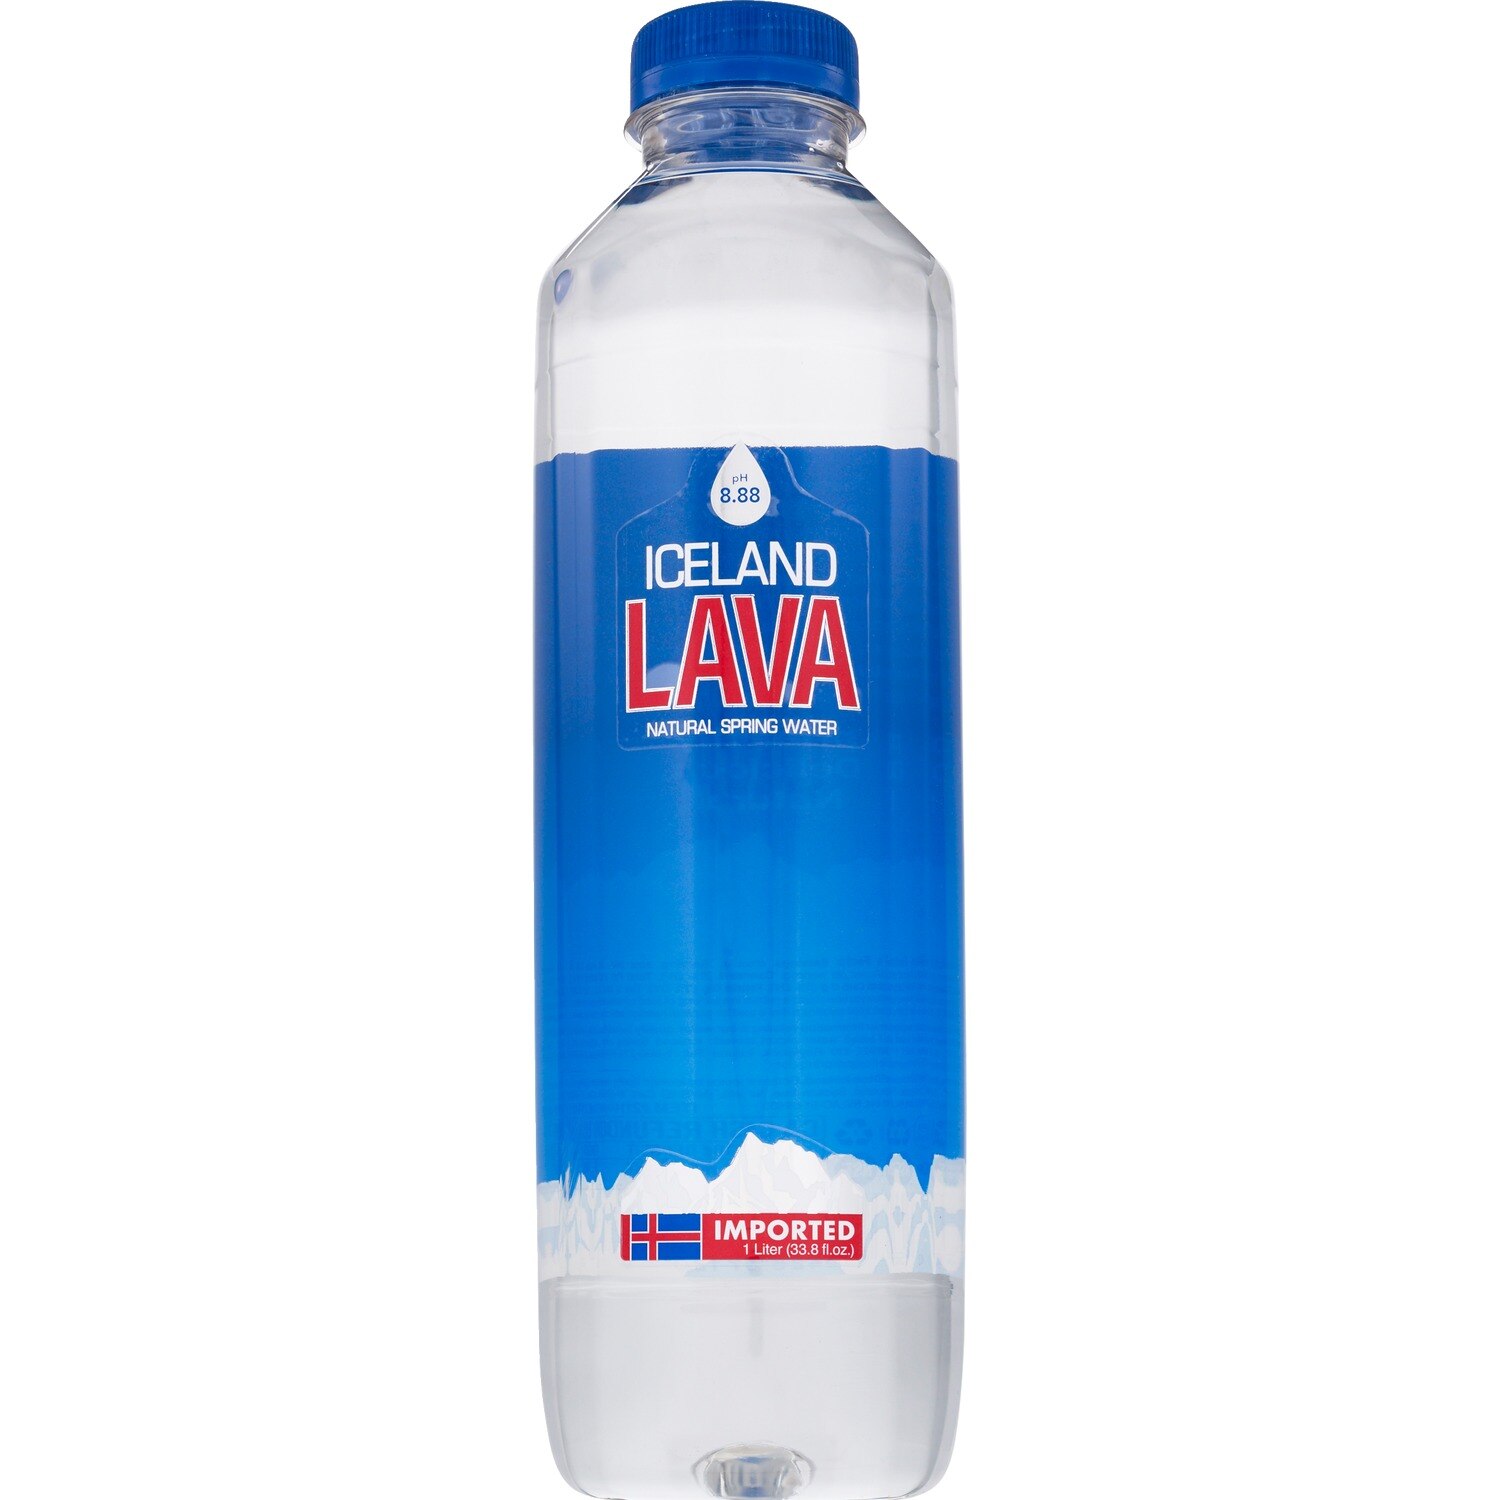 Iceland Lava Natural Spring Water, 1 L